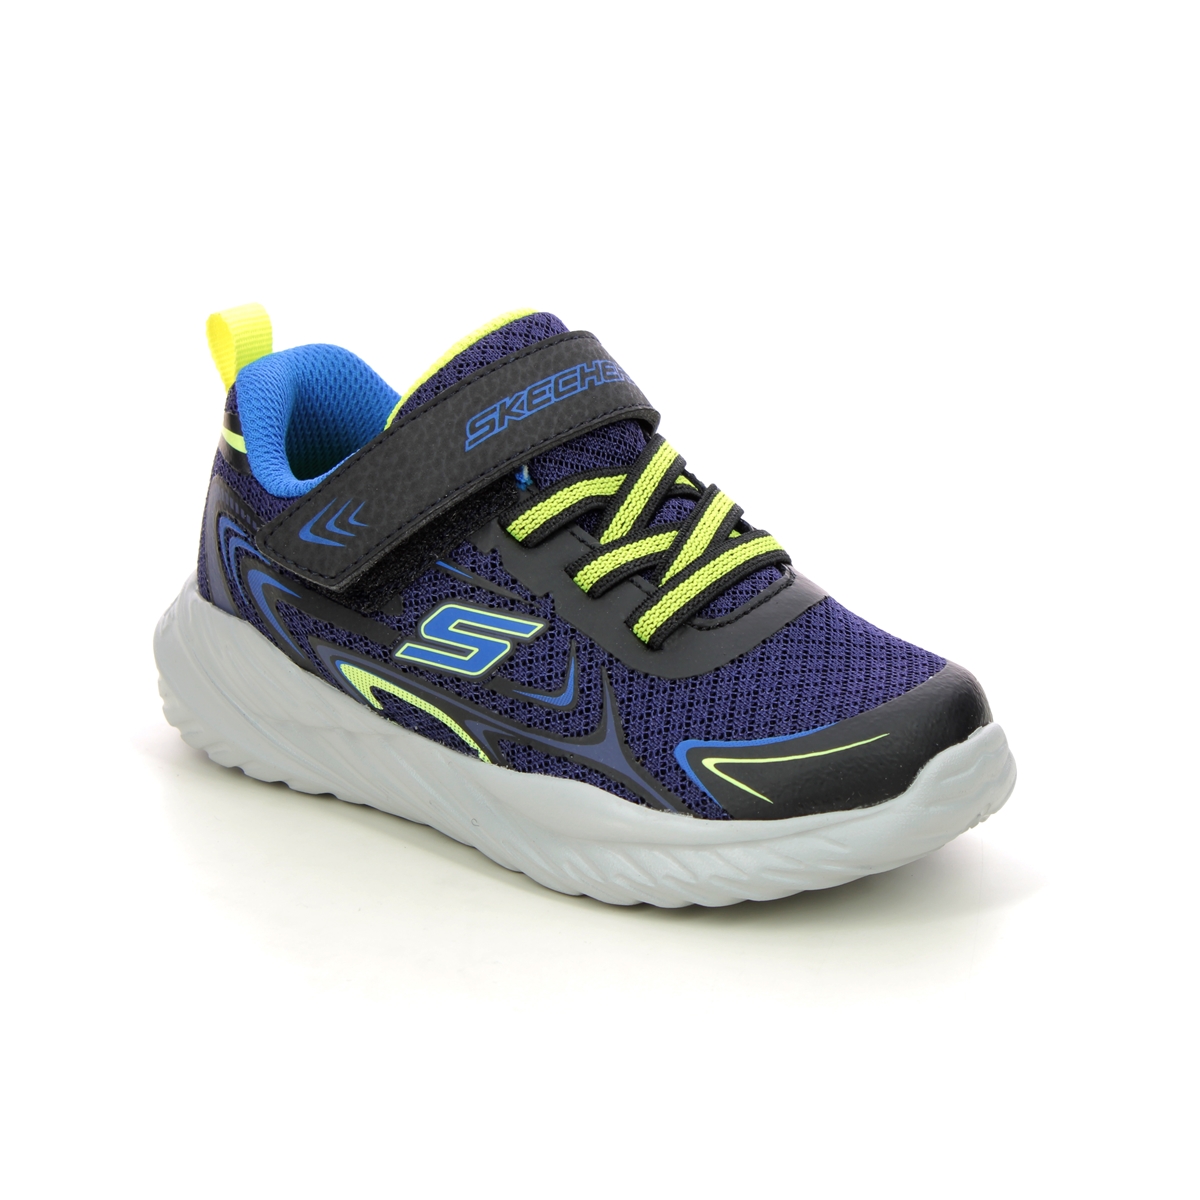 Skechers Lil Sprinter Navy Lime Kids Trainers 403887N In Size 25 In Plain Navy Lime For kids